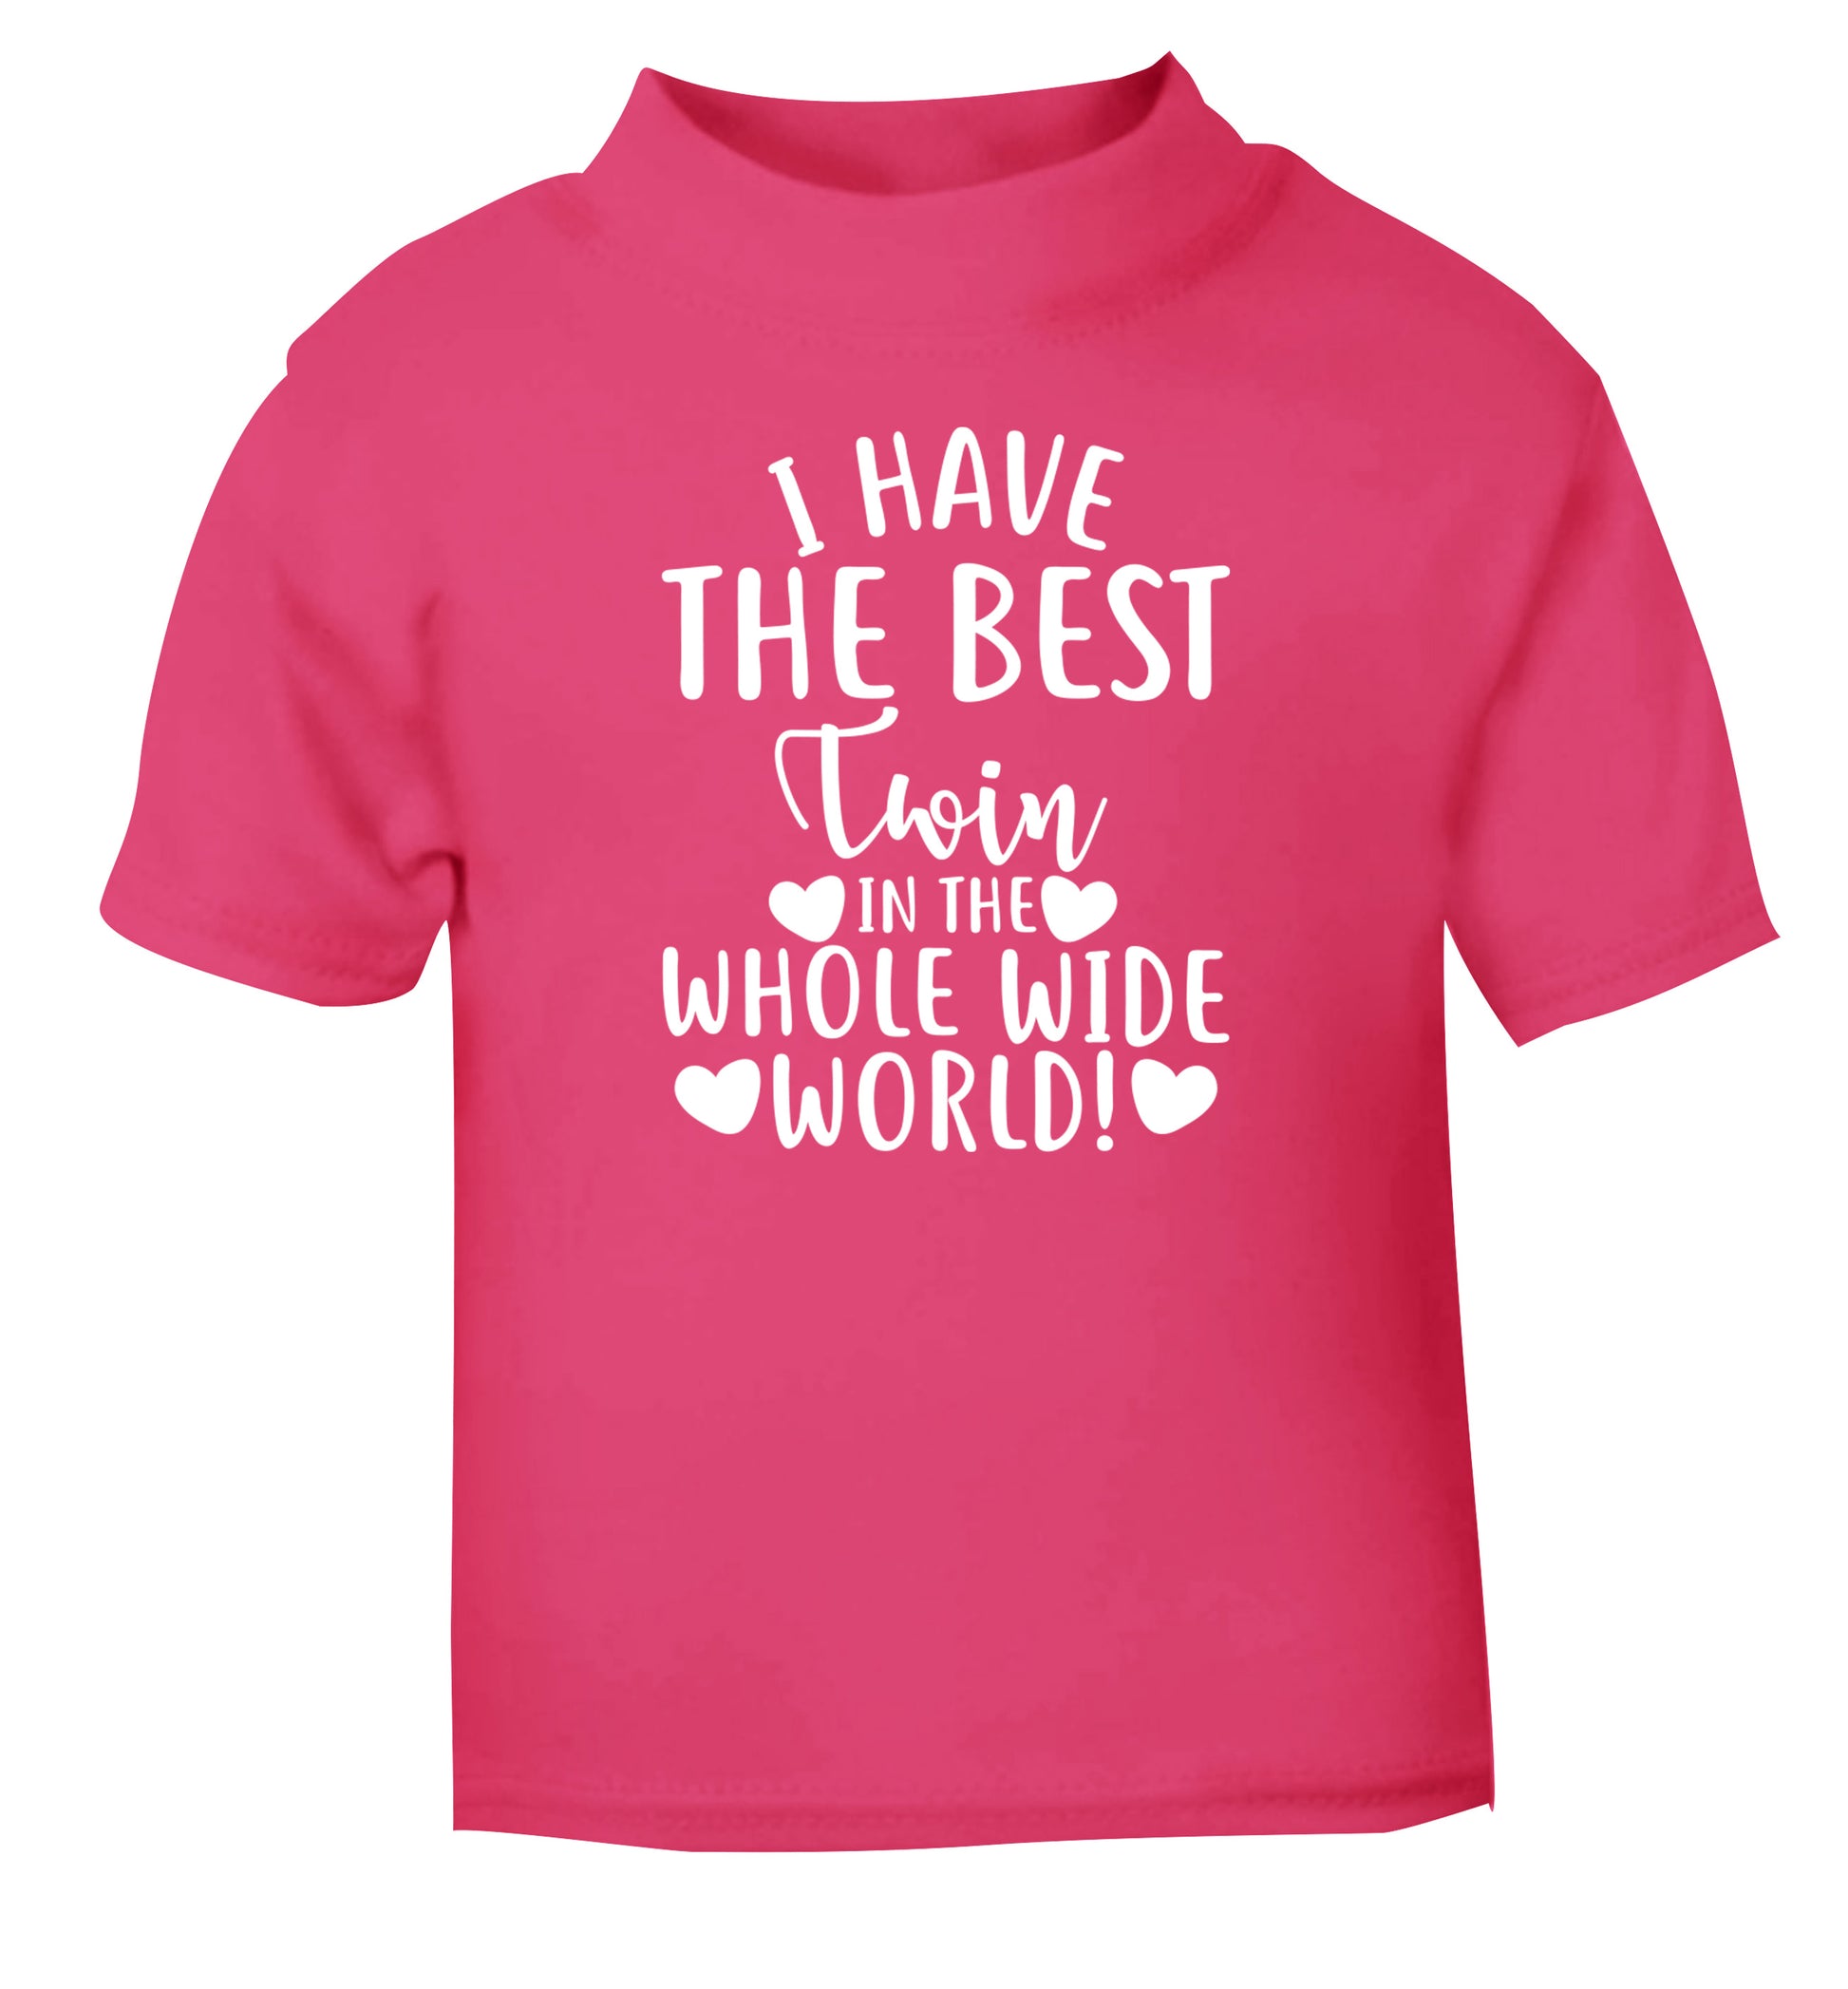 I have the best twin in the whole wide world! pink Baby Toddler Tshirt 2 Years